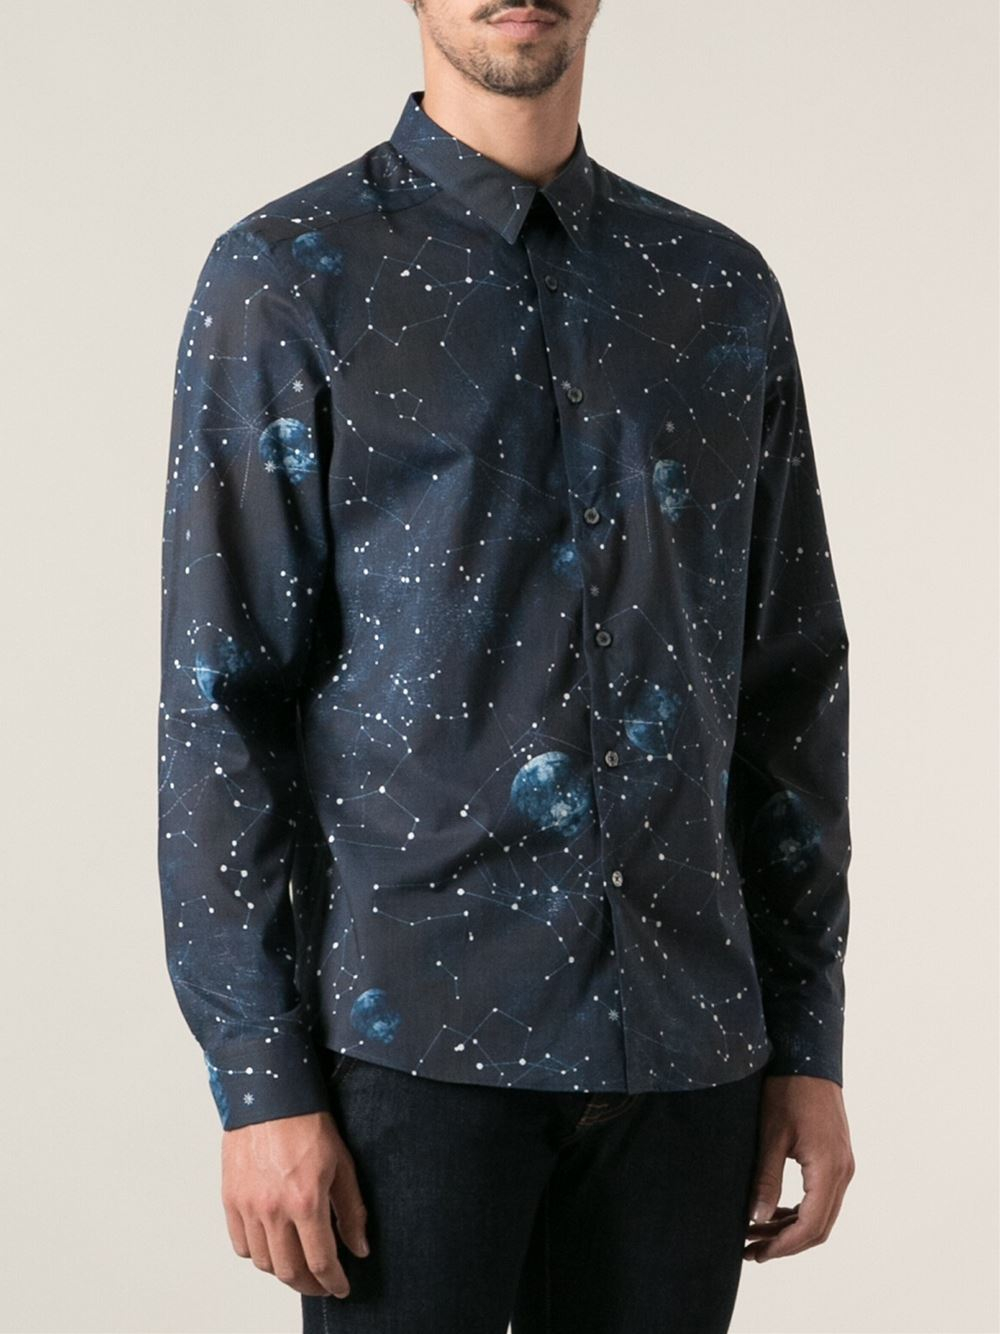 PS by Paul Smith Slim Galaxy Print Shirt in Blue for Men - Lyst